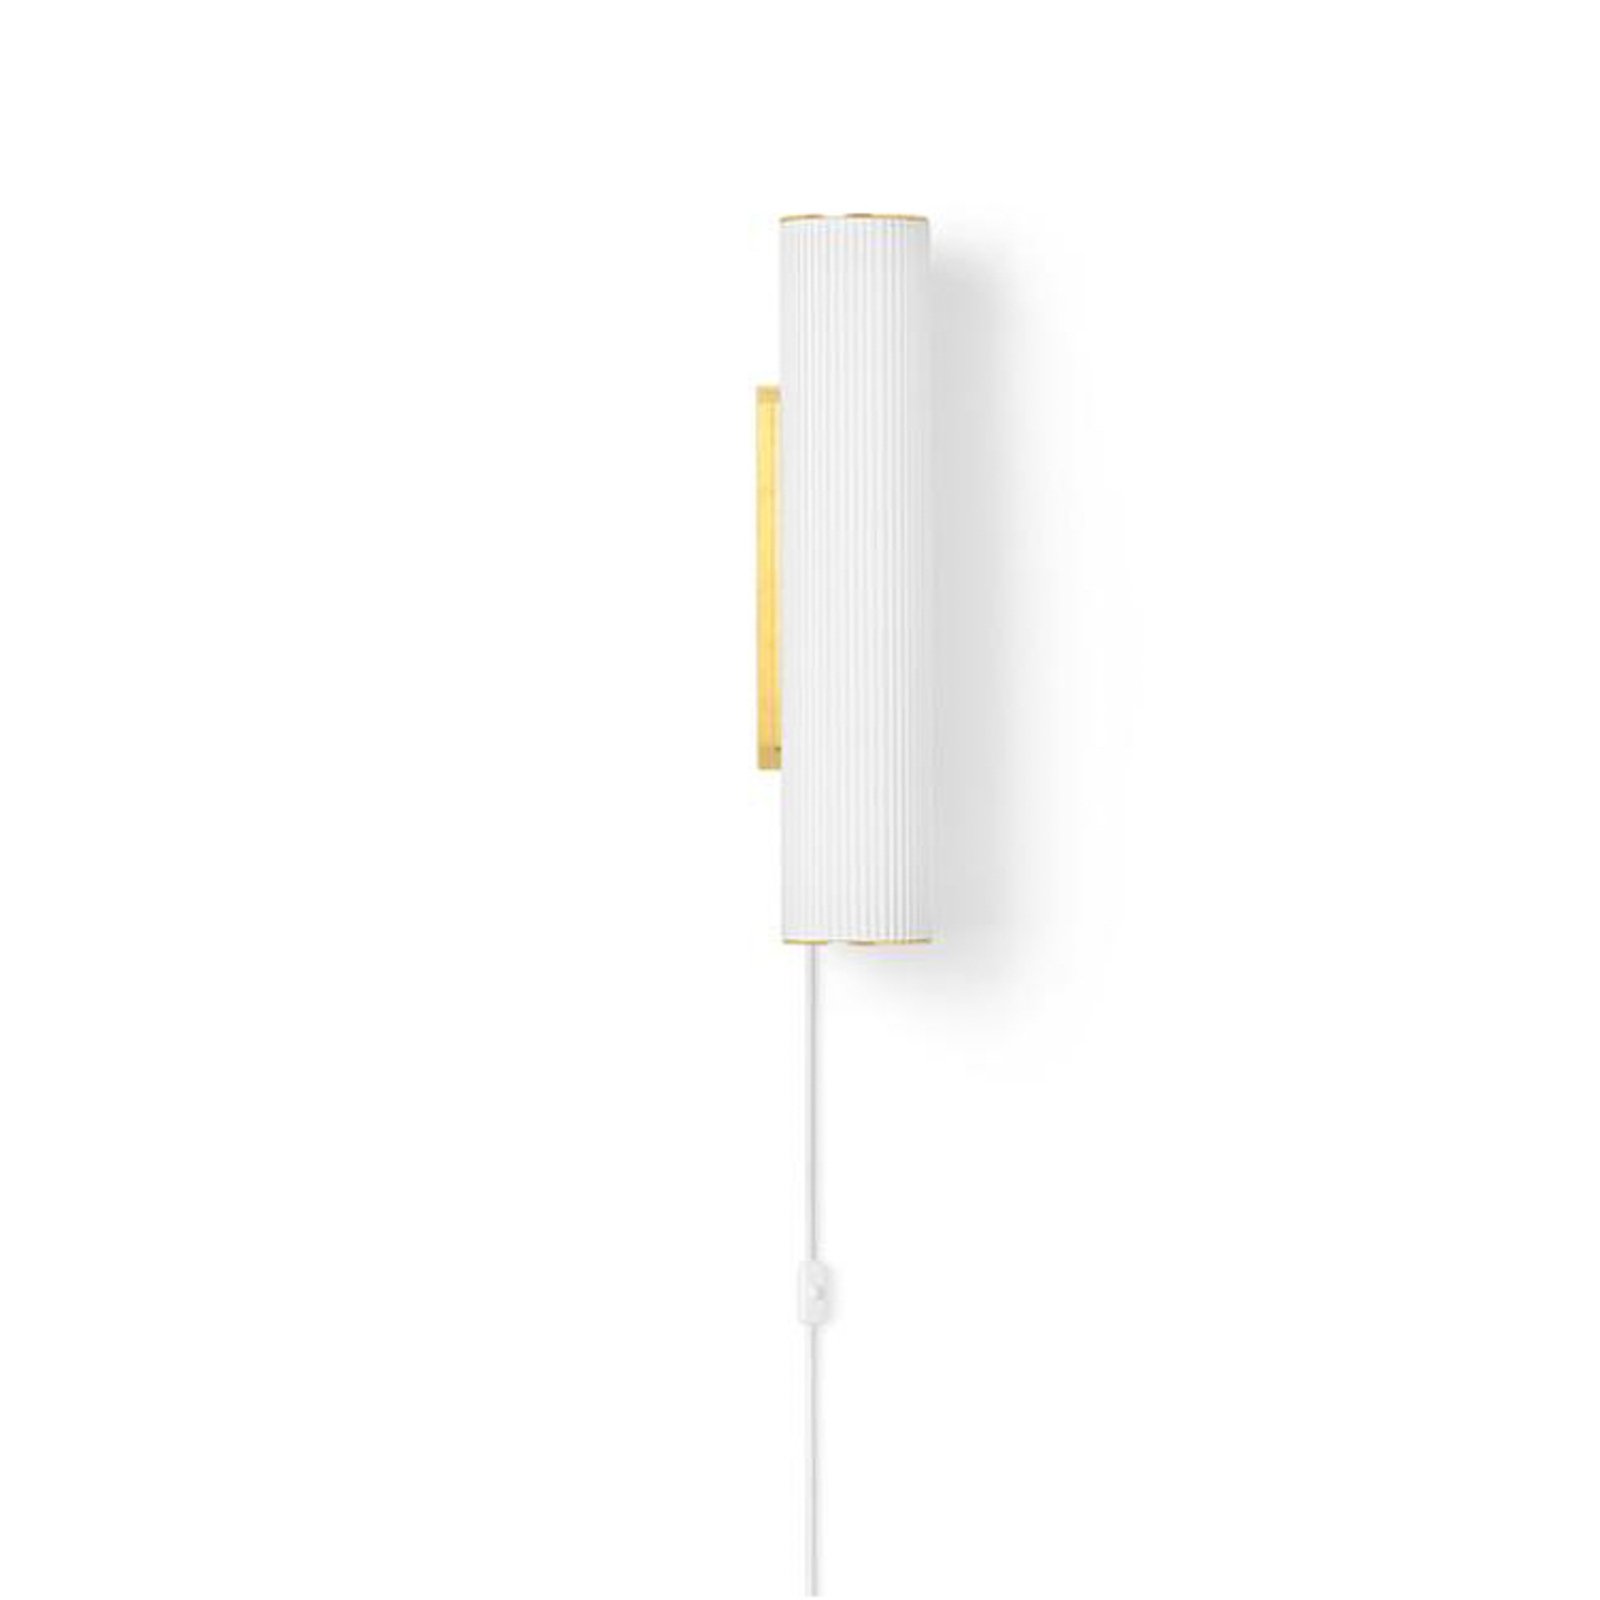 ferm LIVING Vuelta 40, white/brass, plug, remote control, dimmable.